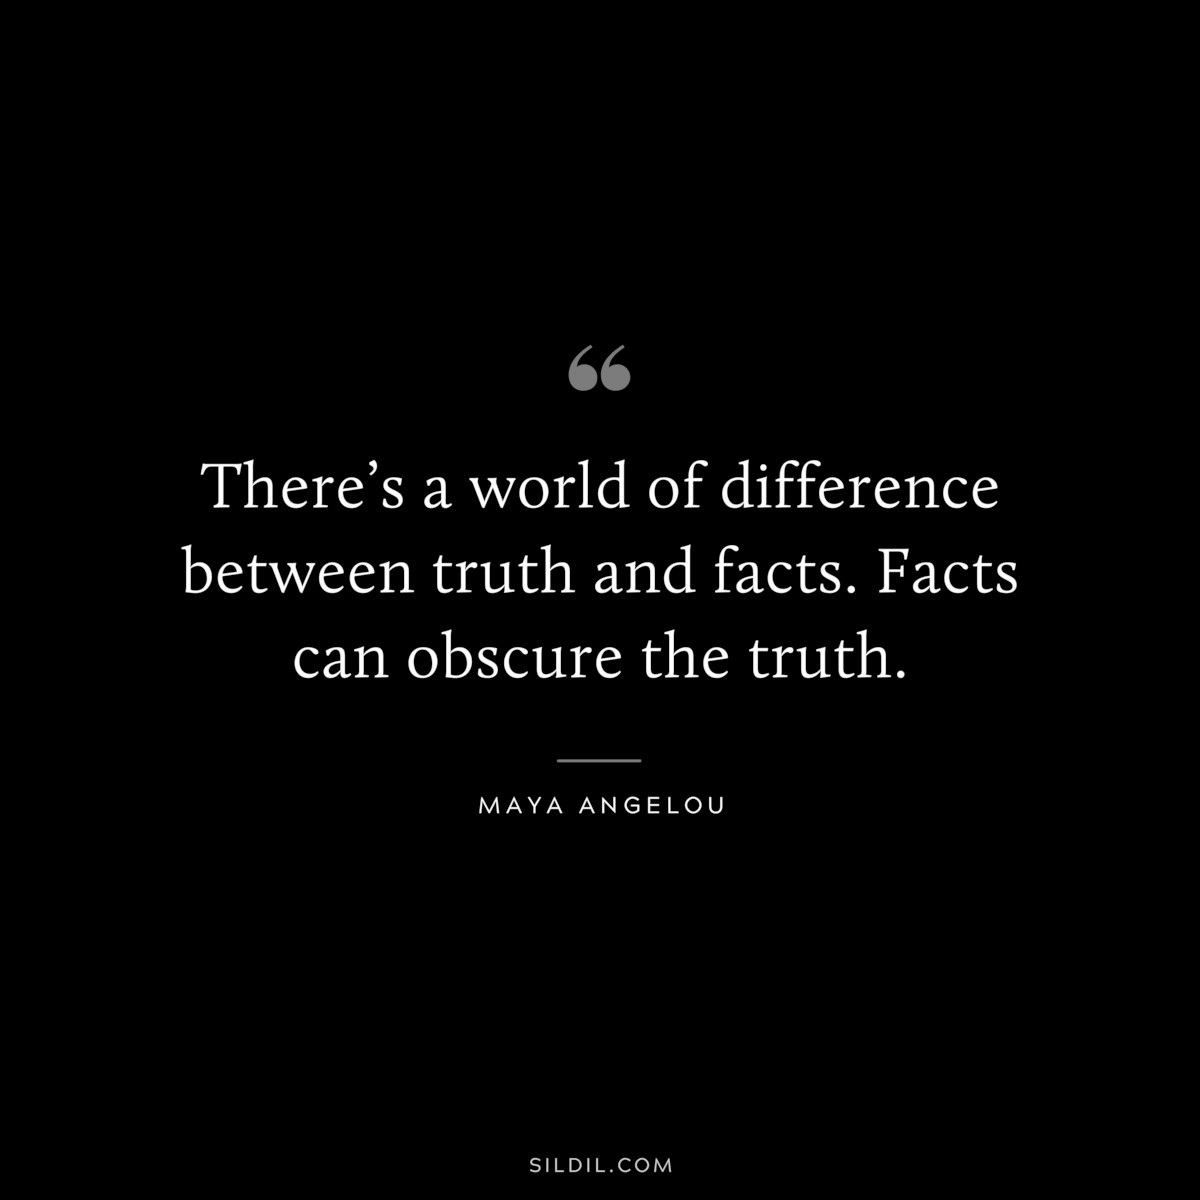 There’s a world of difference between truth and facts. Facts can obscure the truth. ― Maya Angelou